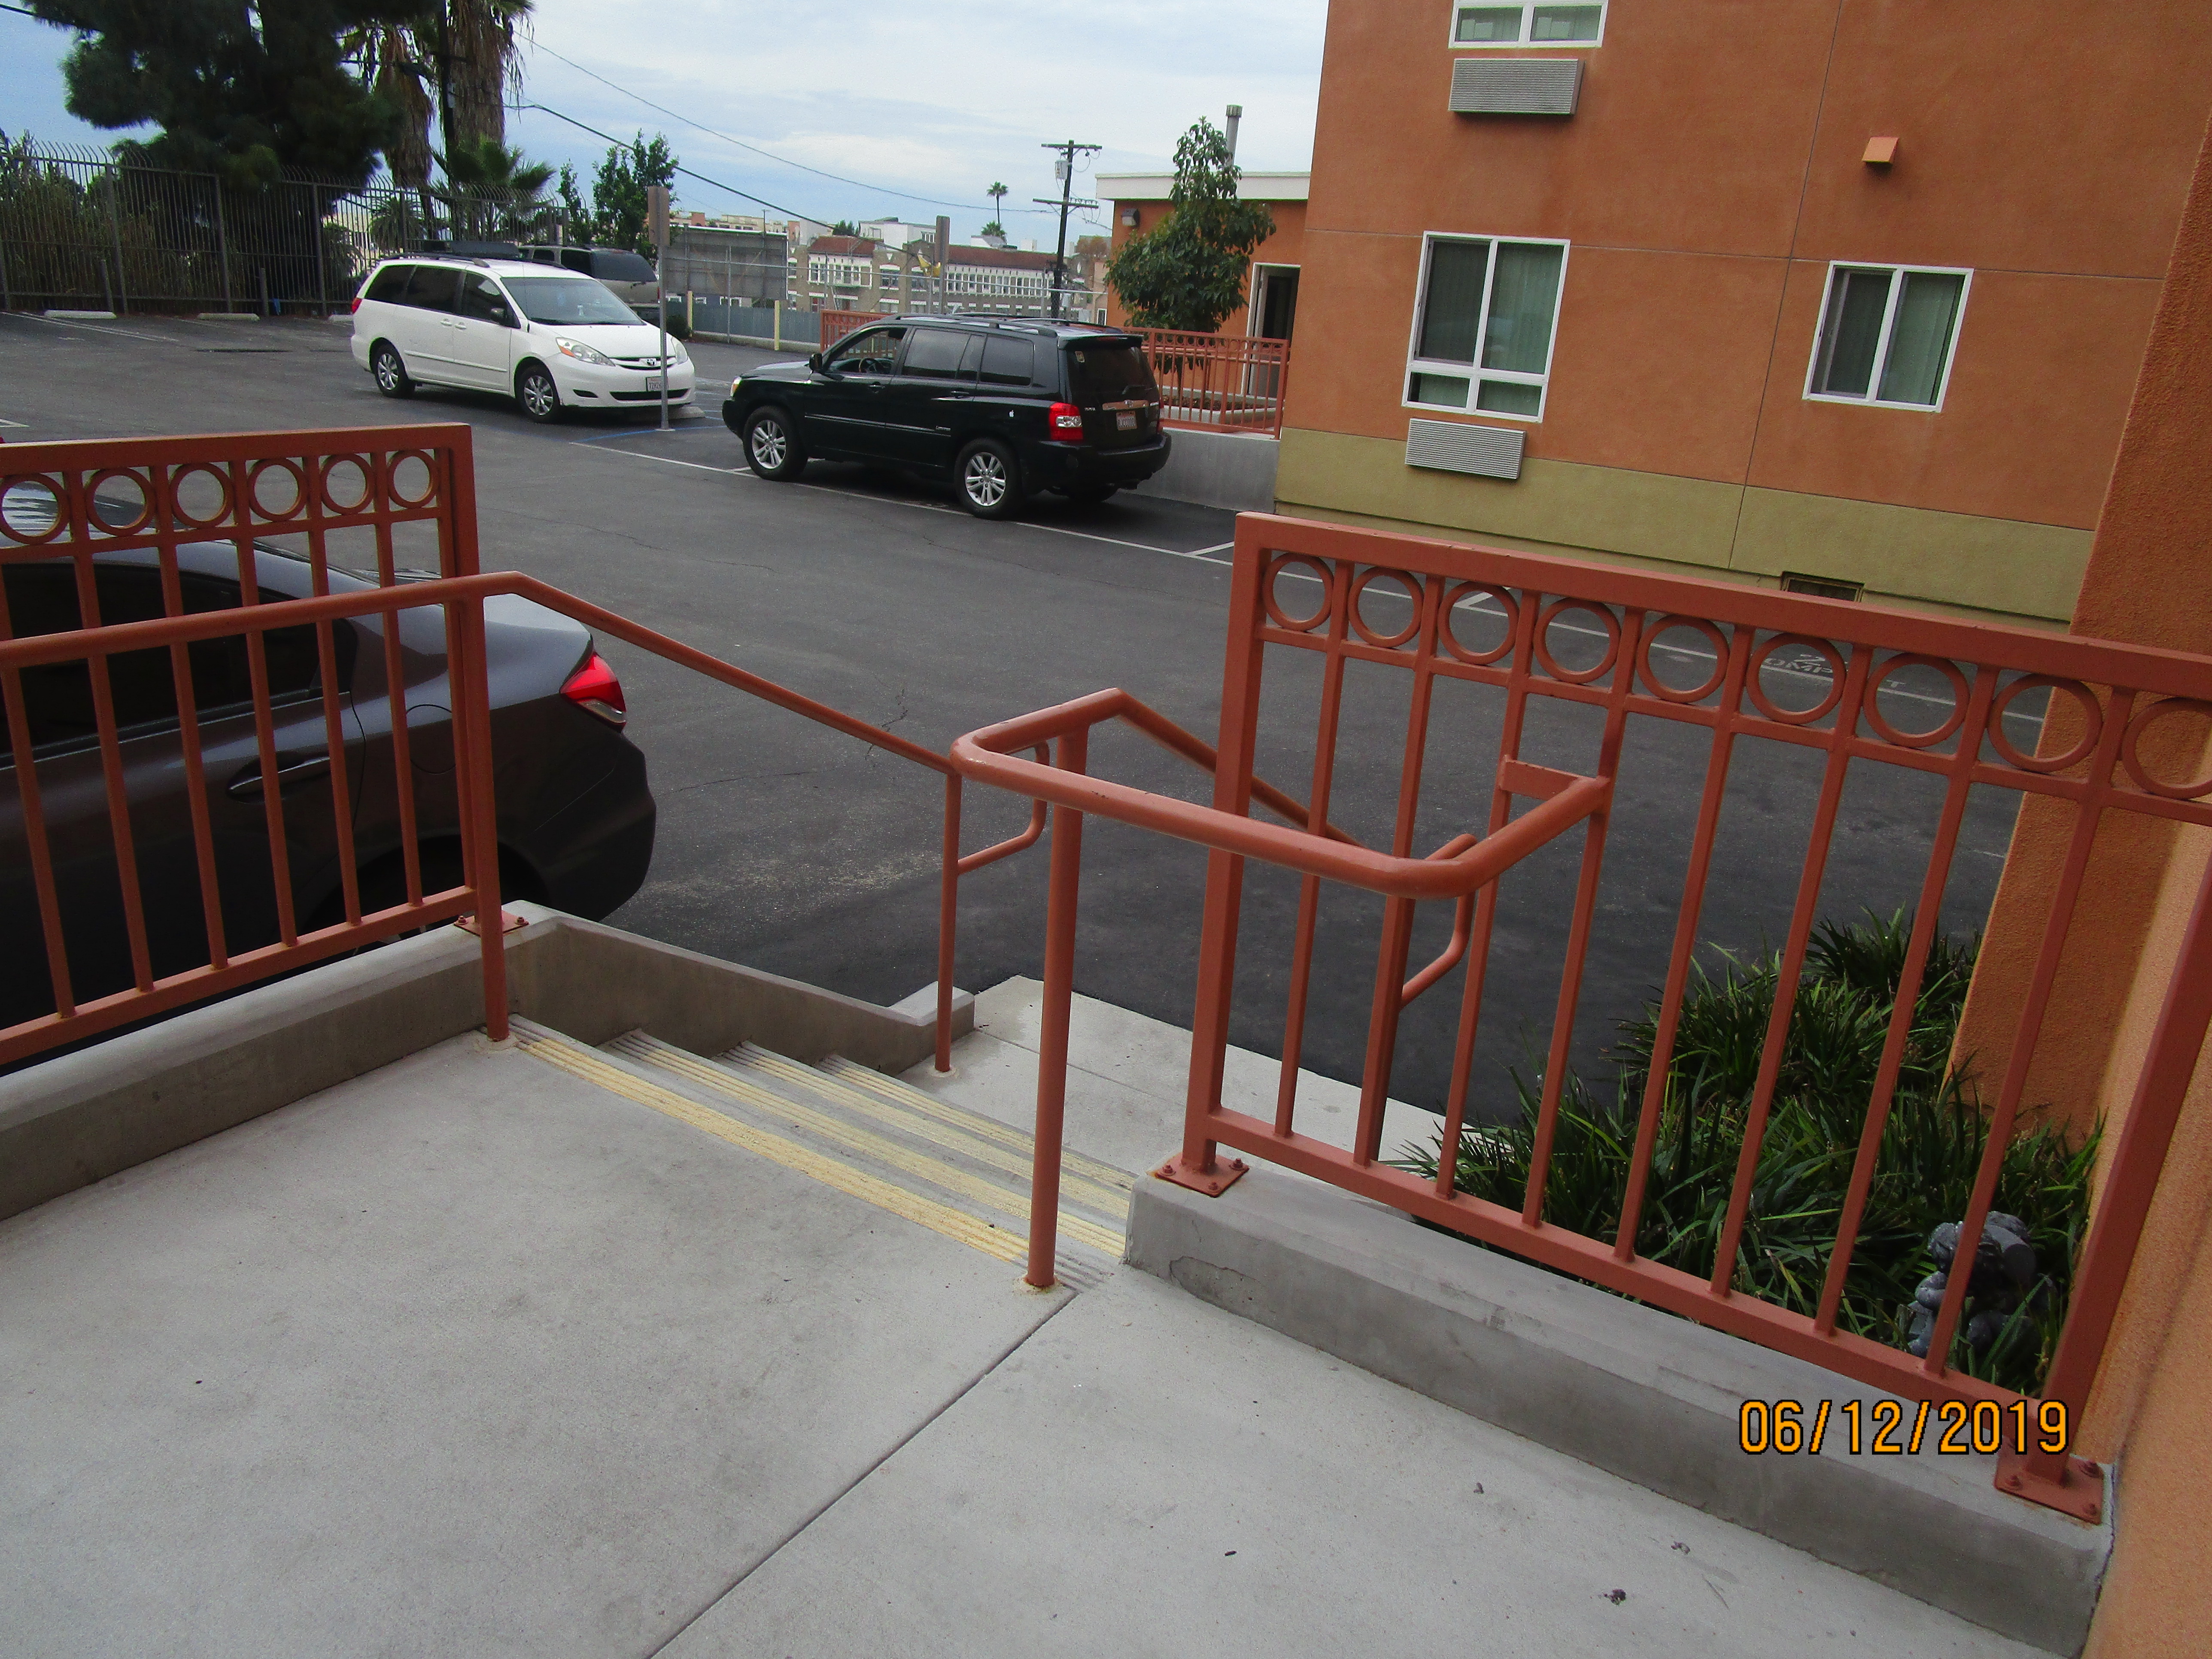 Front view of a four concrete steps with handrails on each side, parking view, parked cars,